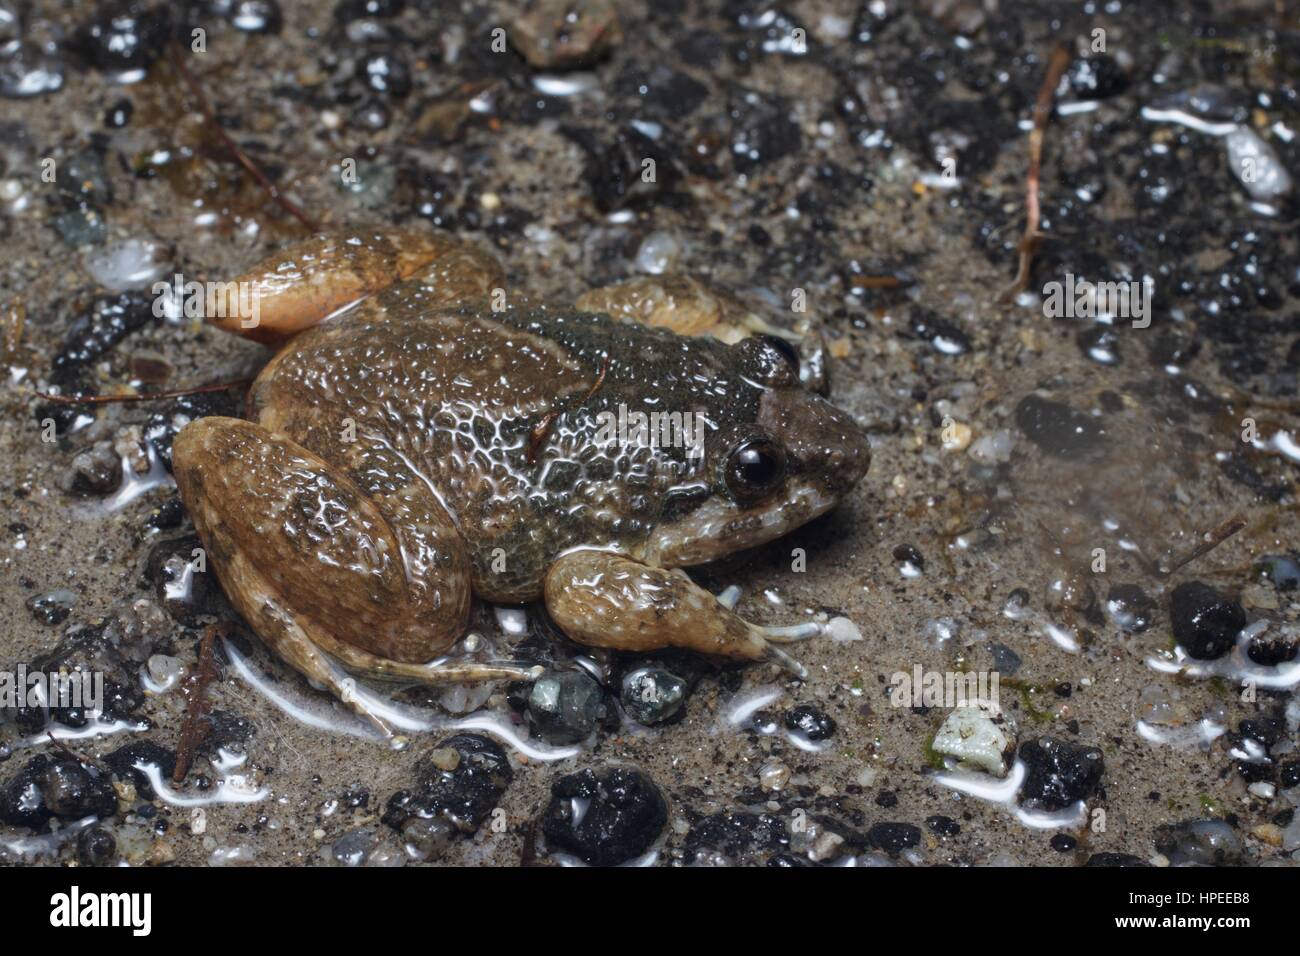 A Corrugated Frog (Limnonectes deinodon) in the rainforest at night in Ulu Semenyih, Pahang, Malaysia Stock Photo